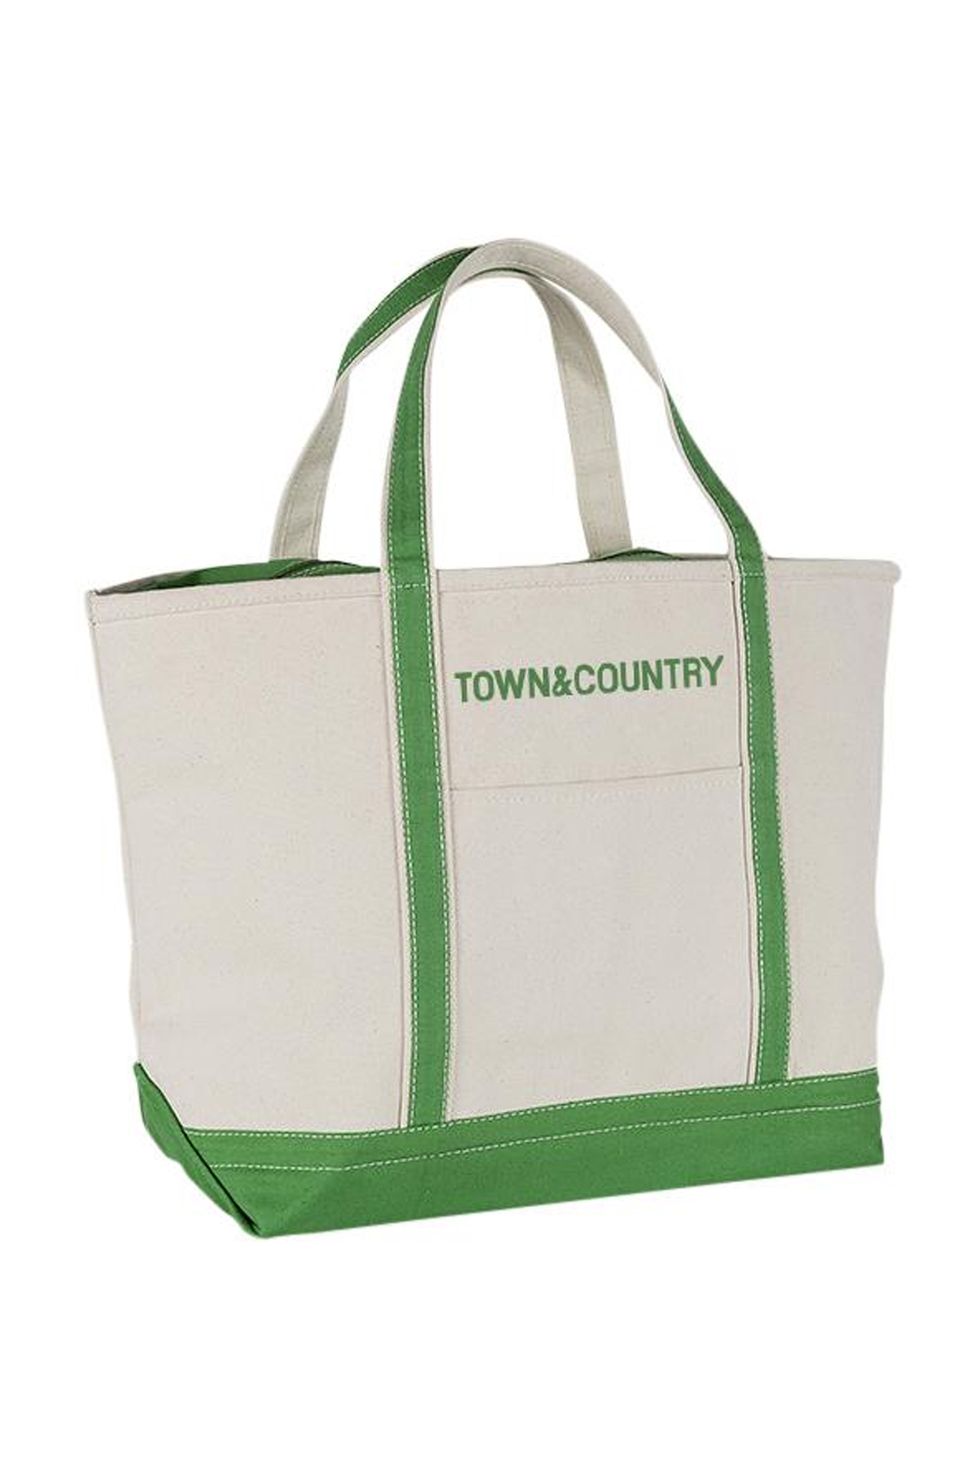 Limited Edition Tote Bag, Green